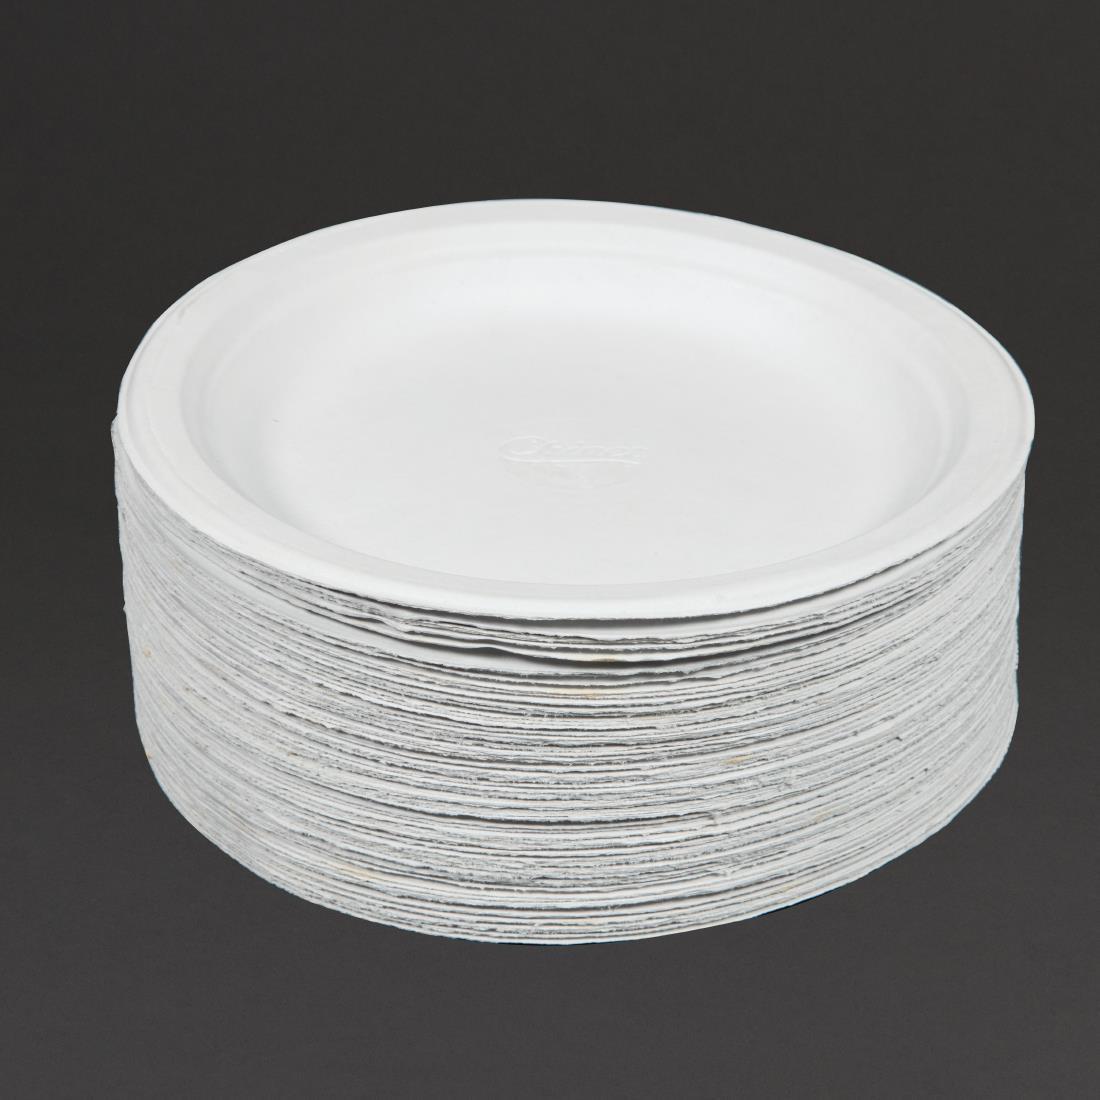 Huhtamaki Compostable Moulded Fibre Chinet Plates 220mm (Pack of 125) - CM148  - 6